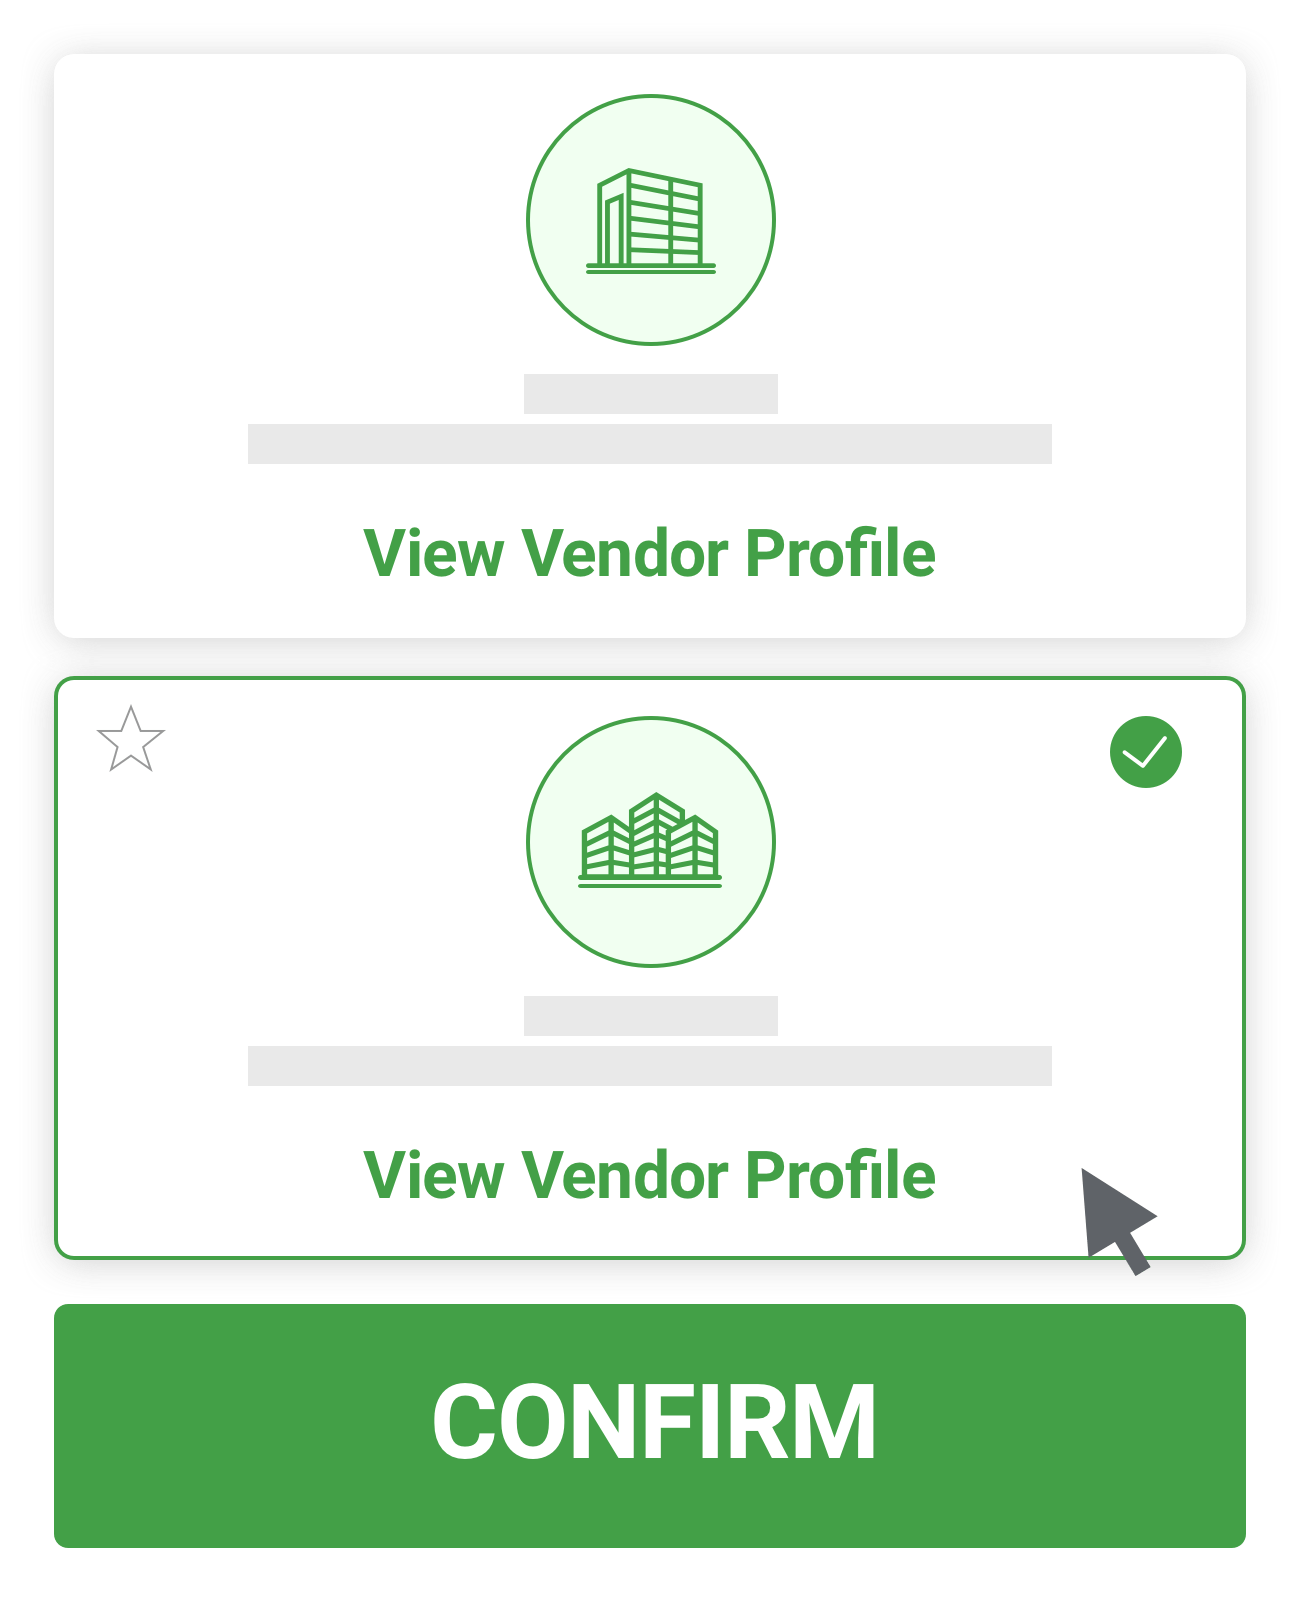 Ventract allows contractors to claim their Vendor profiles